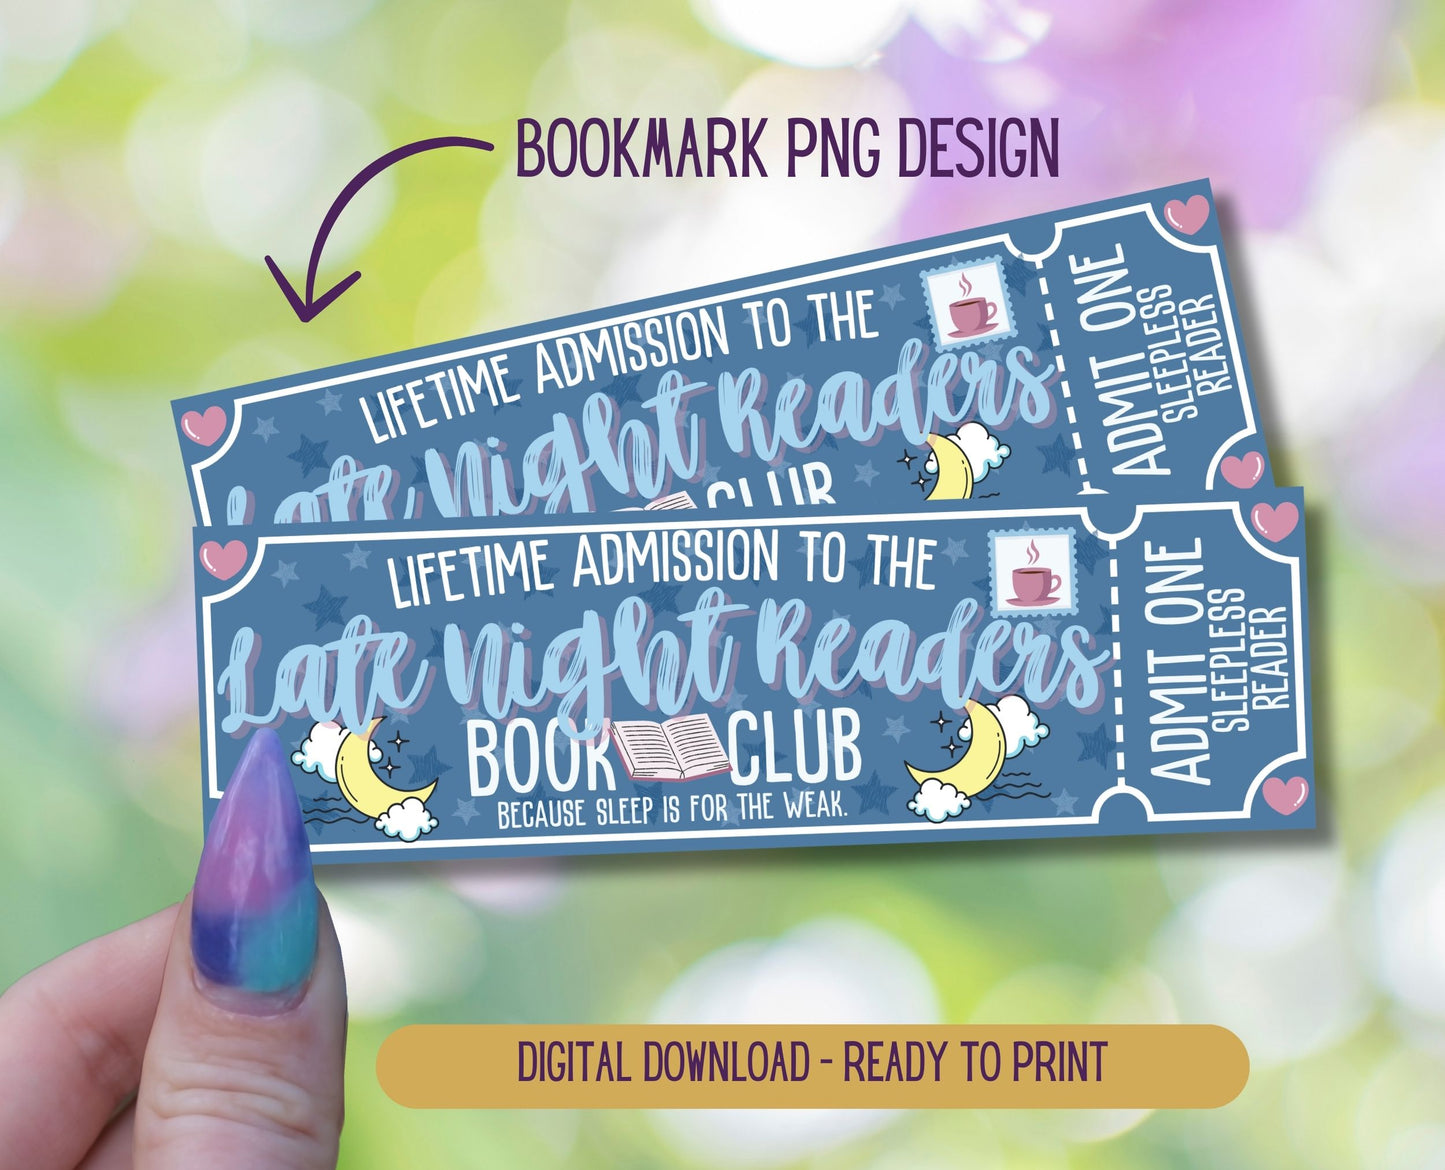 Late Night Readers Admit One Book Club Printable Bookmark